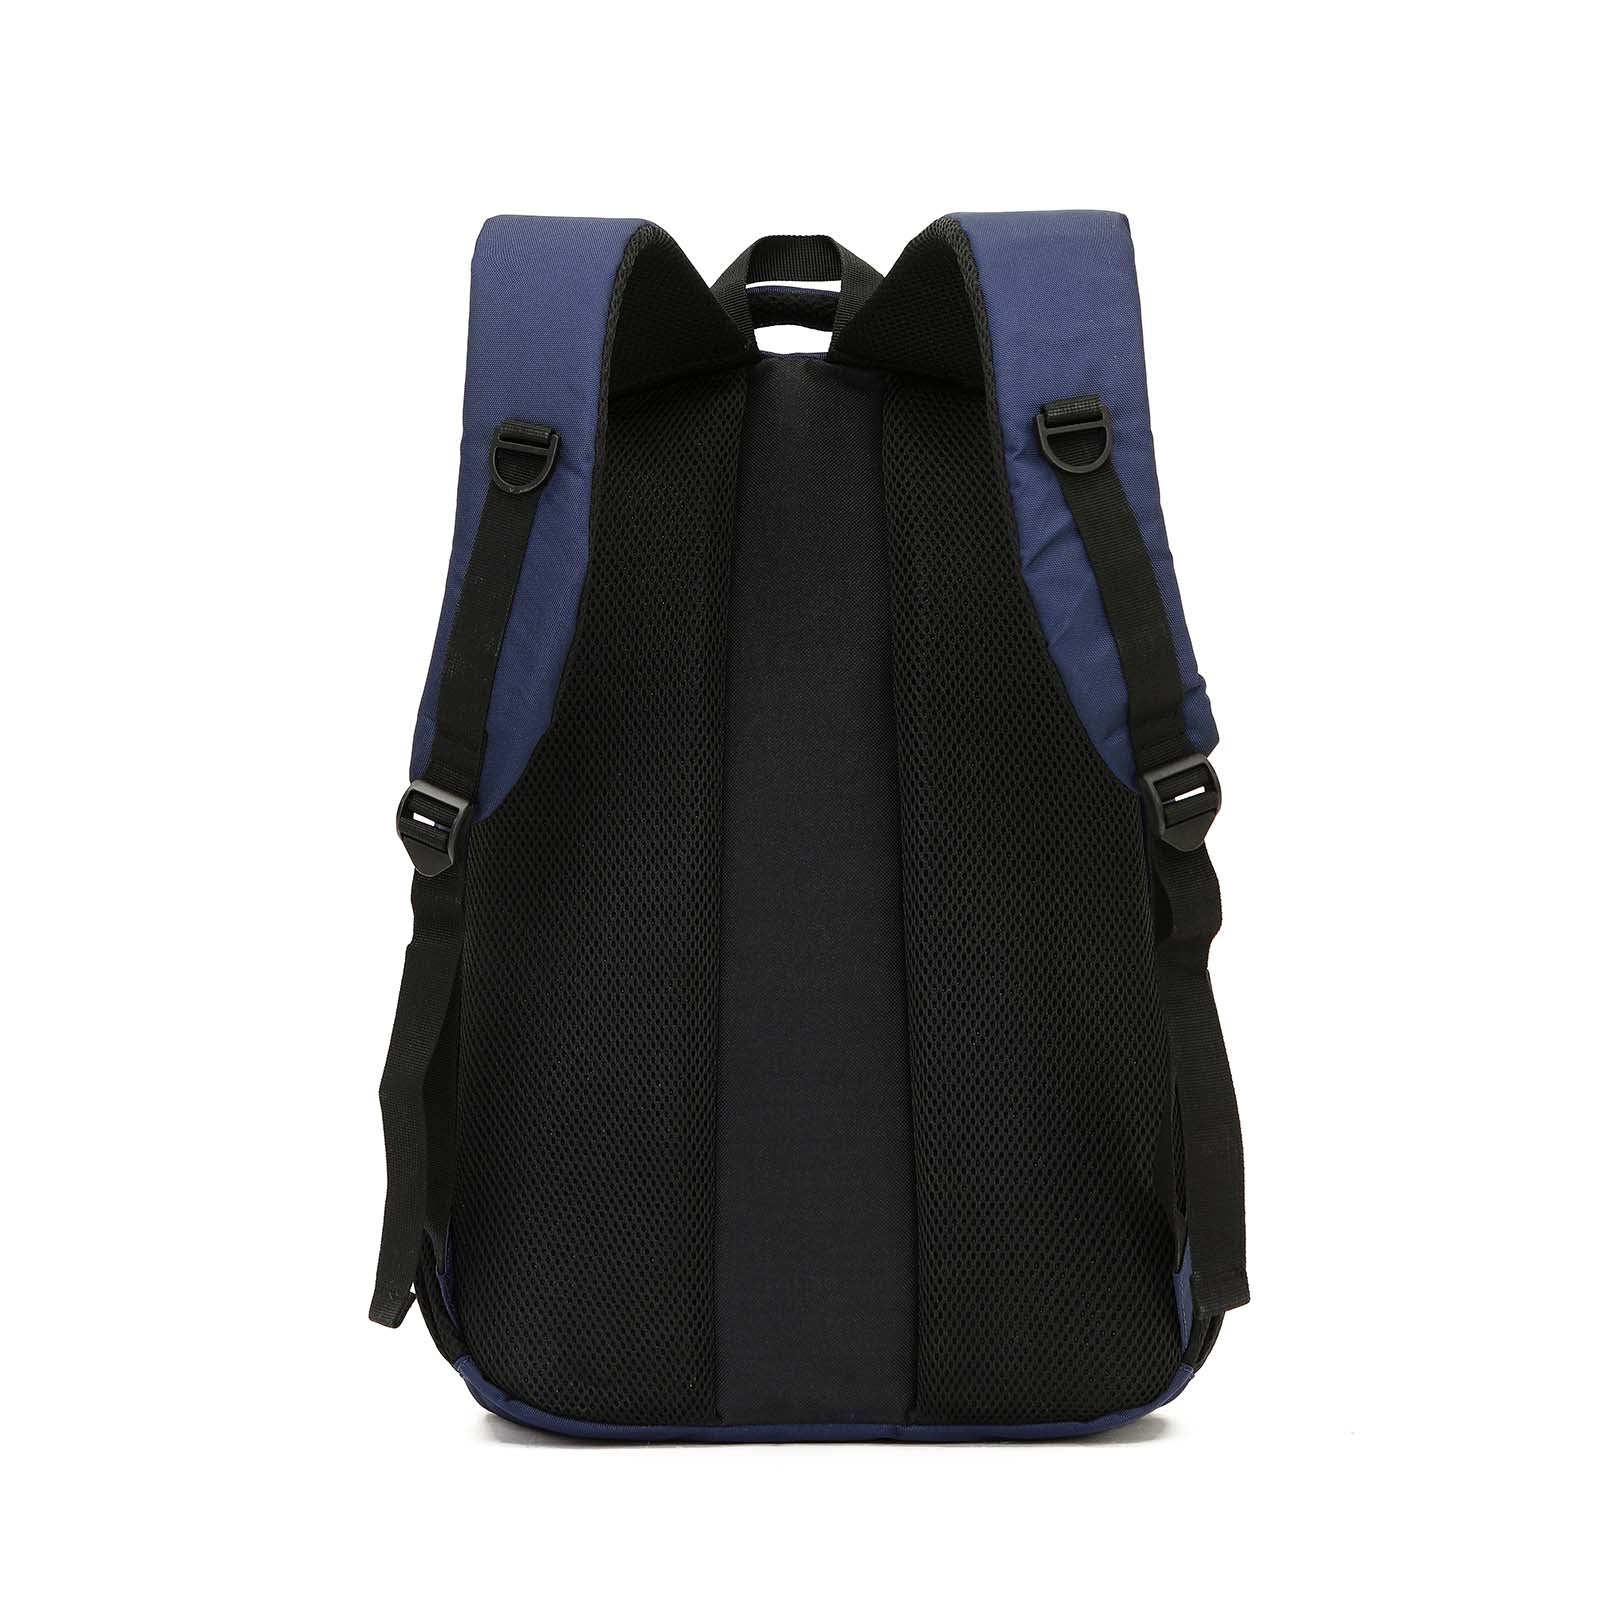 tosca-multi-compartment-laptop-backpack-35l-navy-back-harness